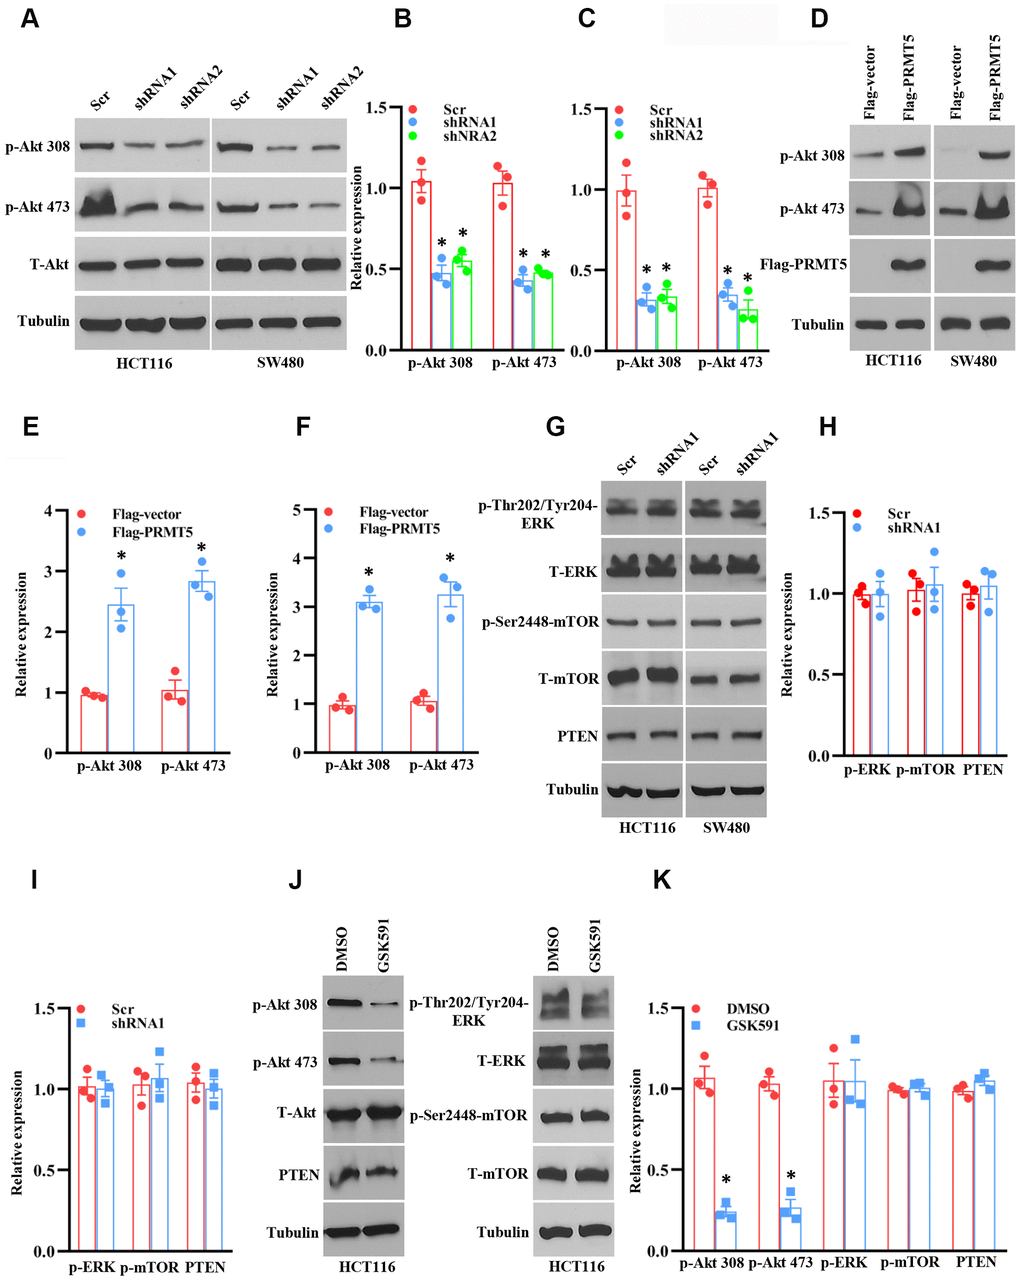 PRMT5 regulates Akt activation in human colorectal cancer cells. (A) Western blot analysis of phospho-Akt and total Akt protein expression level in HCT116 and SW480 cells. Representative data is shown. (B, C) The indicated proteins are quantified in HCT116 and SW480 cells. *P D) Western blot analysis of indicated protein expression level in HCT116 and SW480 cells. Representative data is shown. (E, F) The indicated proteins are quantified in HCT116 and SW480 cells. *P G) Western blot analysis of indicated protein expression level in HCT116 and SW480 cells. Representative data is shown. (H, I) The indicated proteins are quantified in HCT116 and SW480 cells. (J) Western blot analysis of indicated protein expression level in HCT116 cells. Representative data is shown. (K) The indicated proteins are quantified in HCT116 cells. *P 